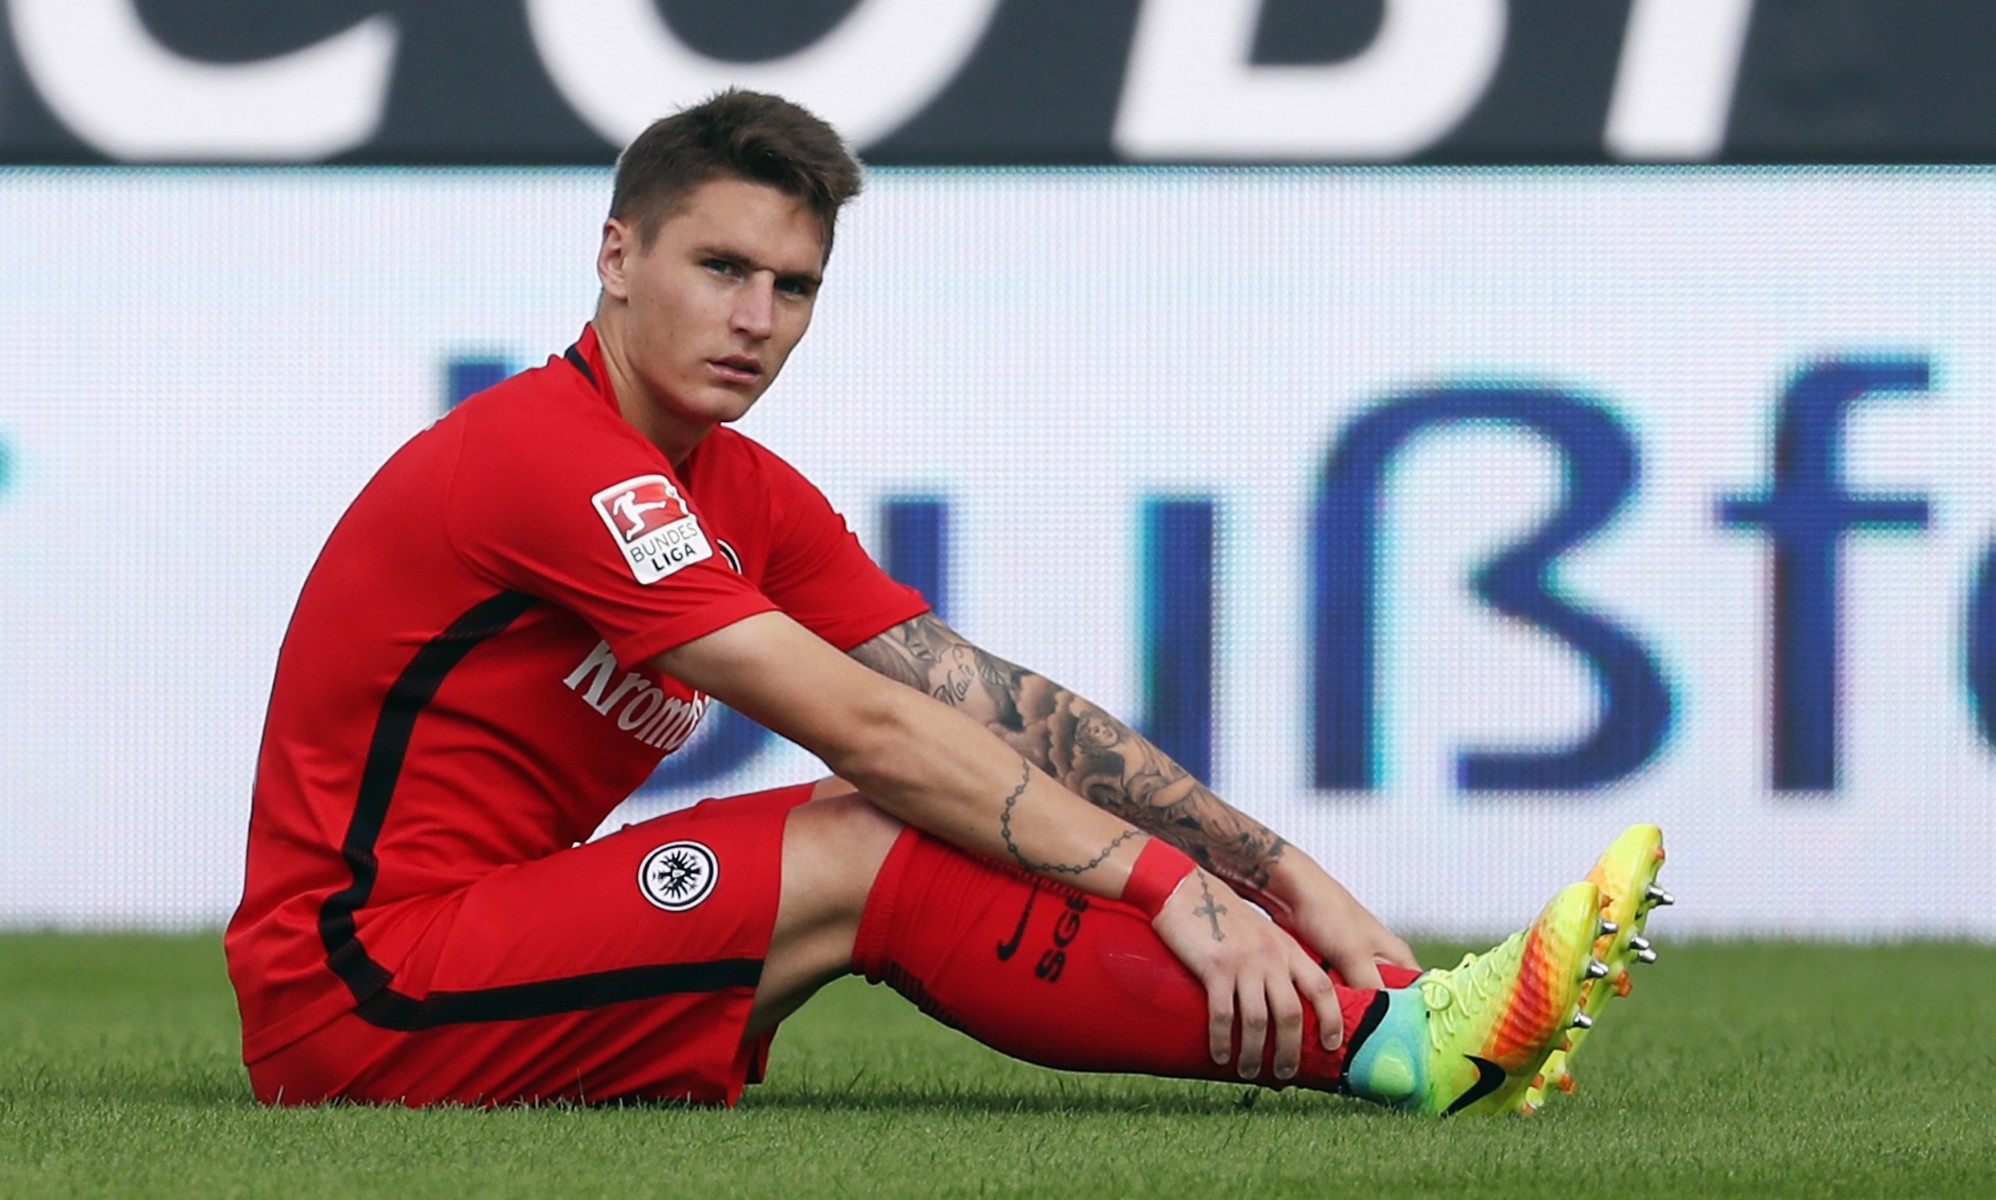 The Uruguay international missed much of his season on loan with Eintracht Frankfurt through injury - then was not allowed to play in the DFB-Pokal Cup final